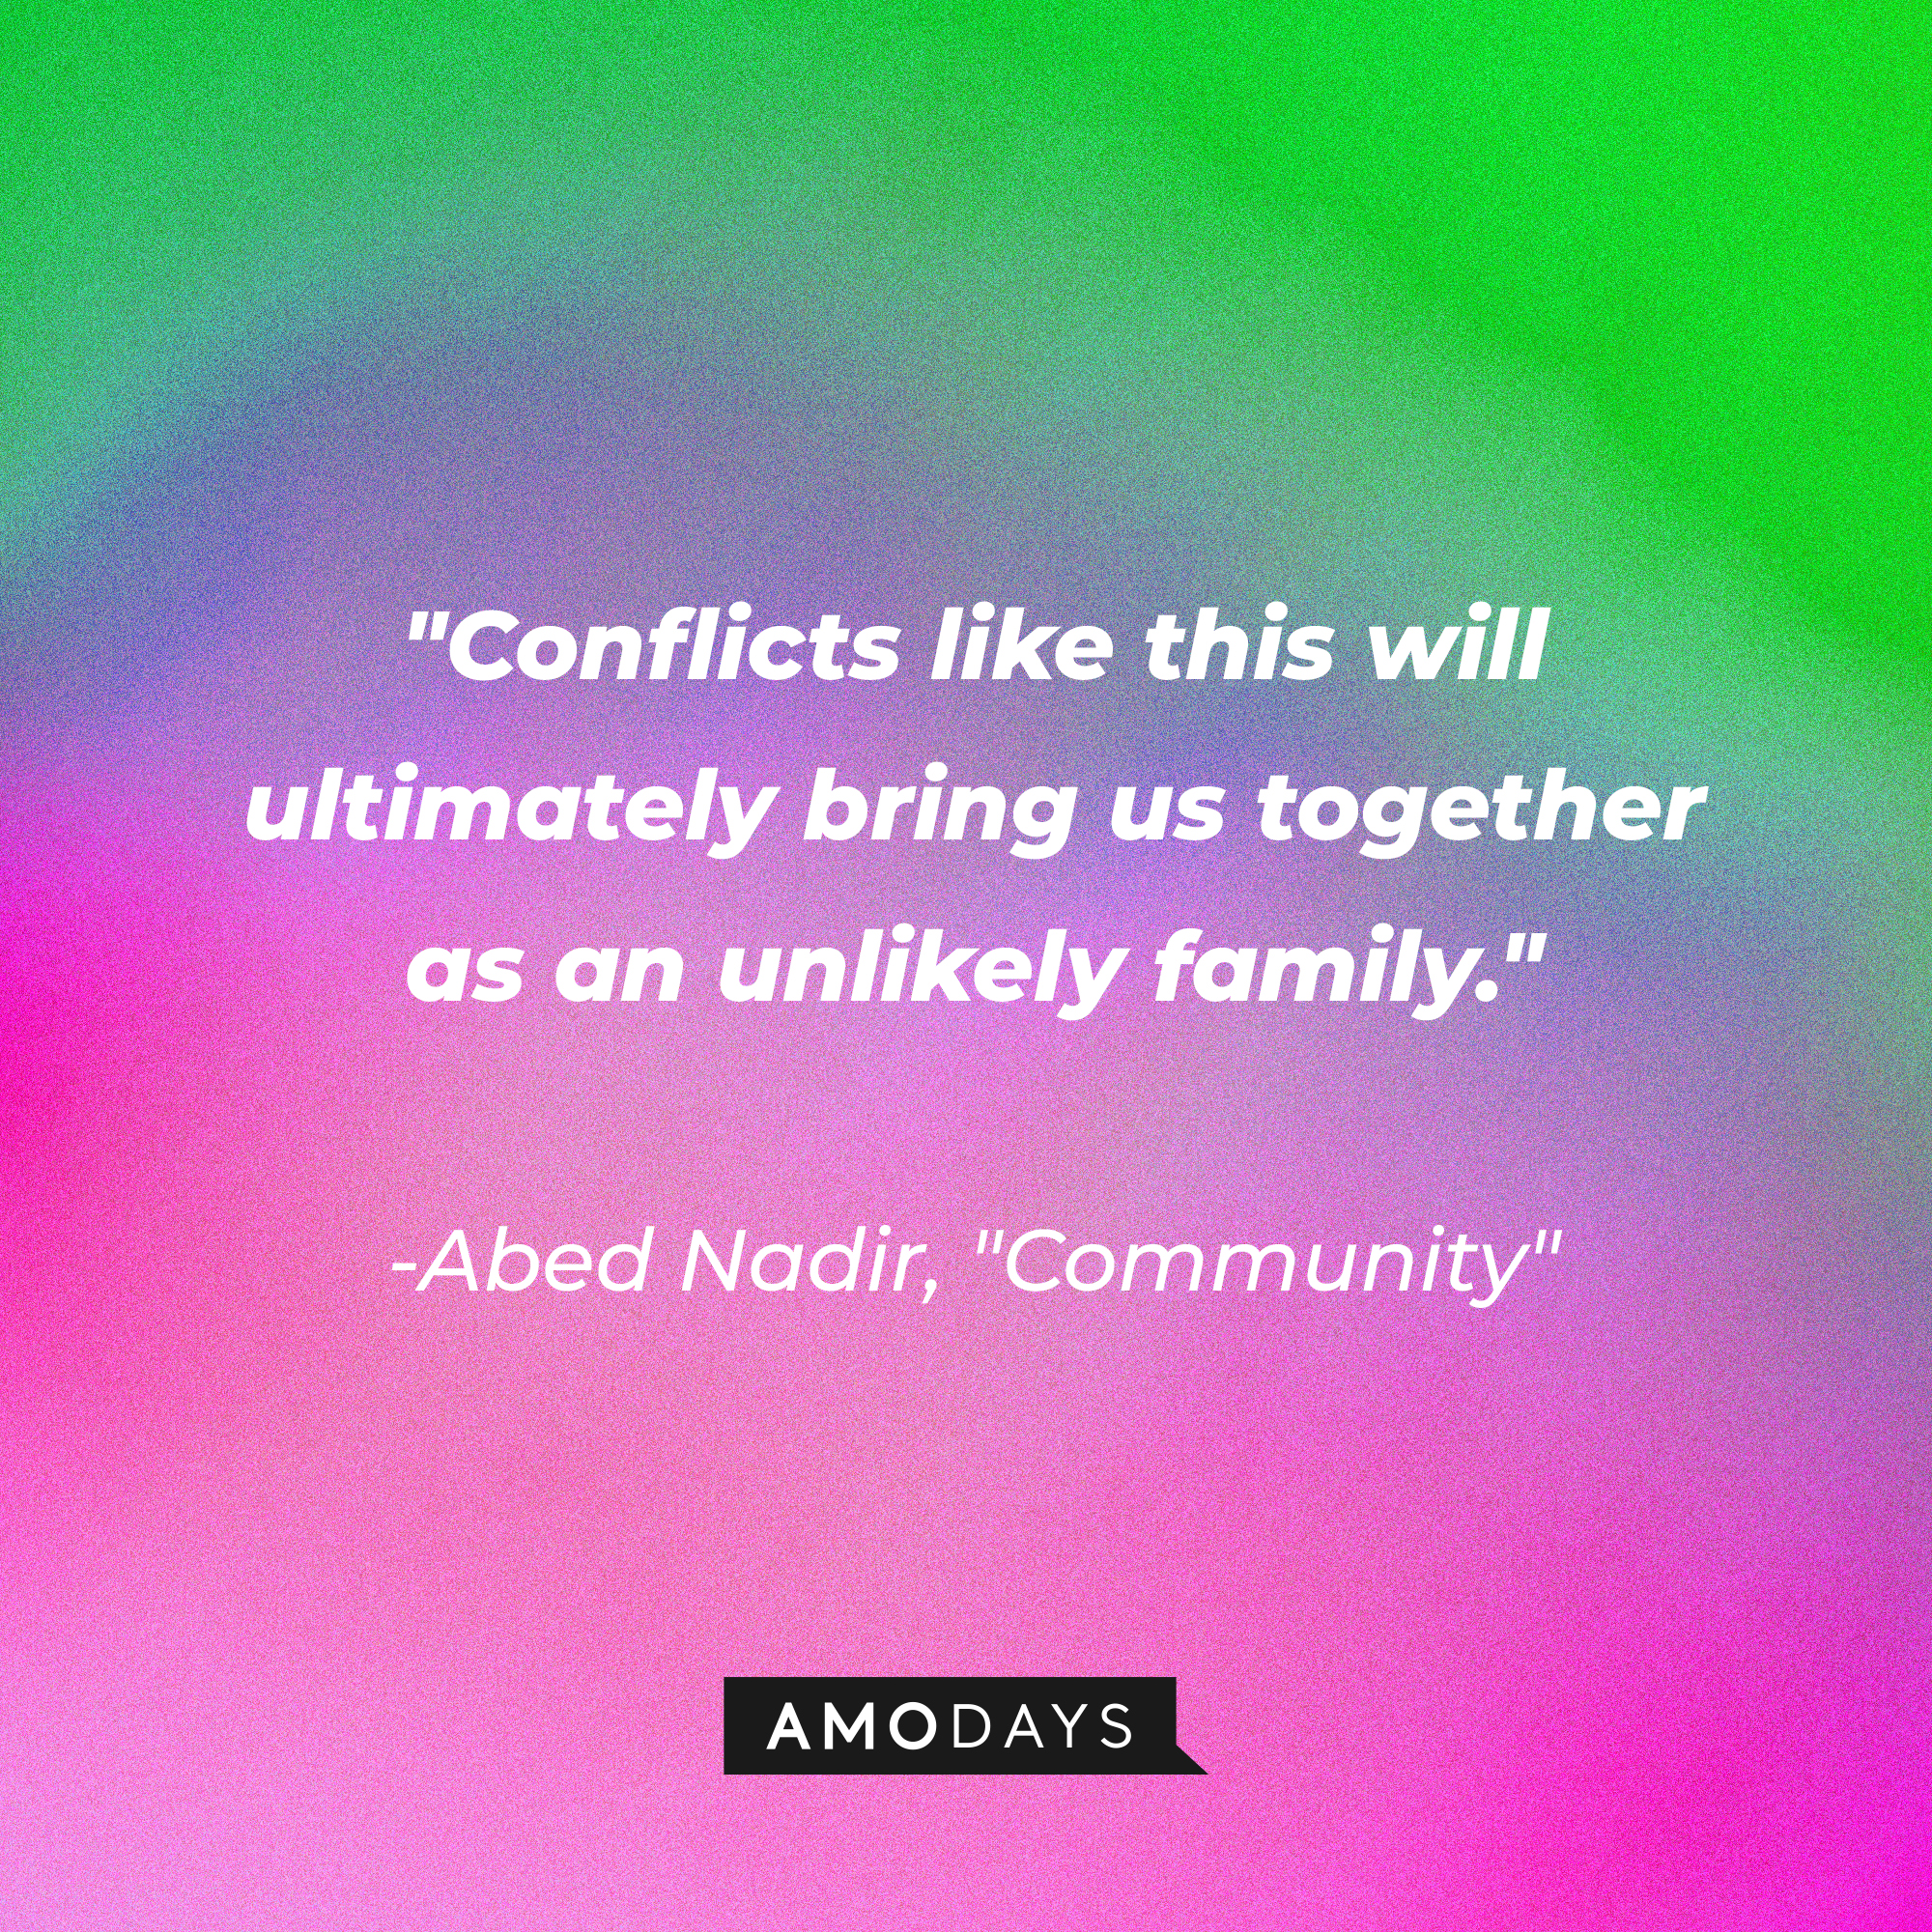 Abed Nadir's quote: "Conflicts like this will ultimately bring us together as an unlikely family." | Source: Amodays